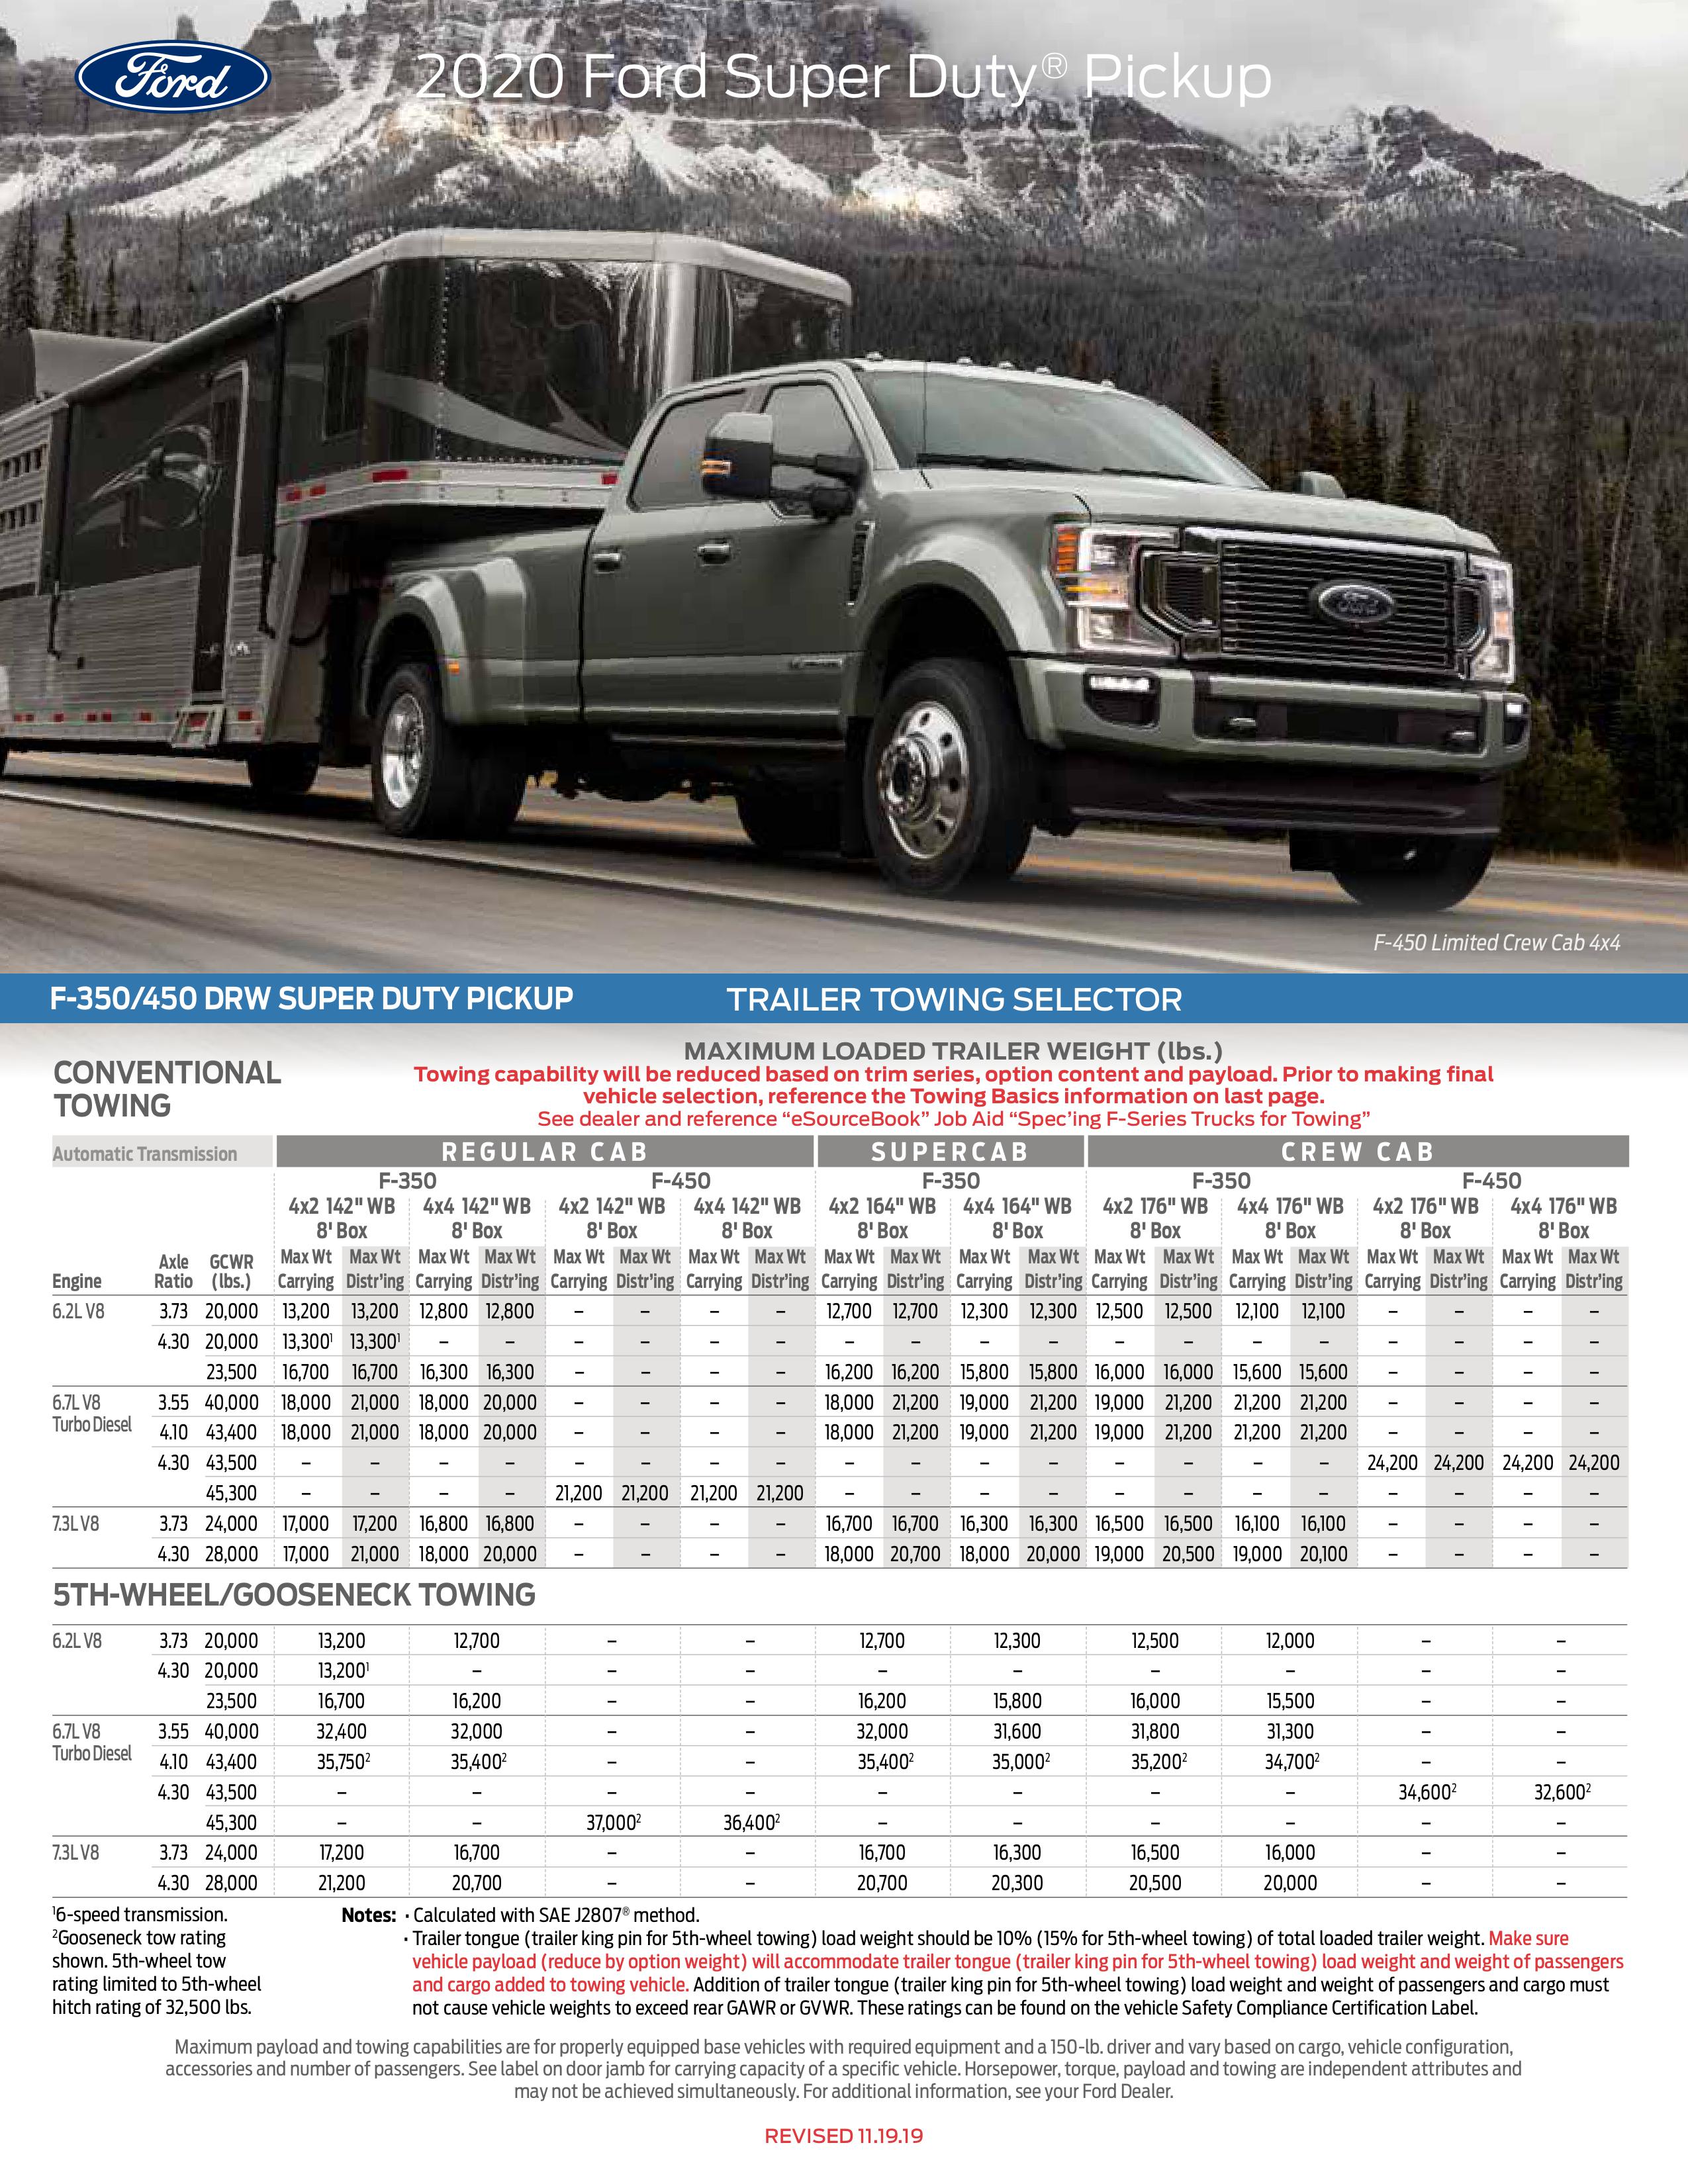 2020 Super Duty Towing Guide | Corning Ford 2021 Ford Rv And Trailer Towing Guide